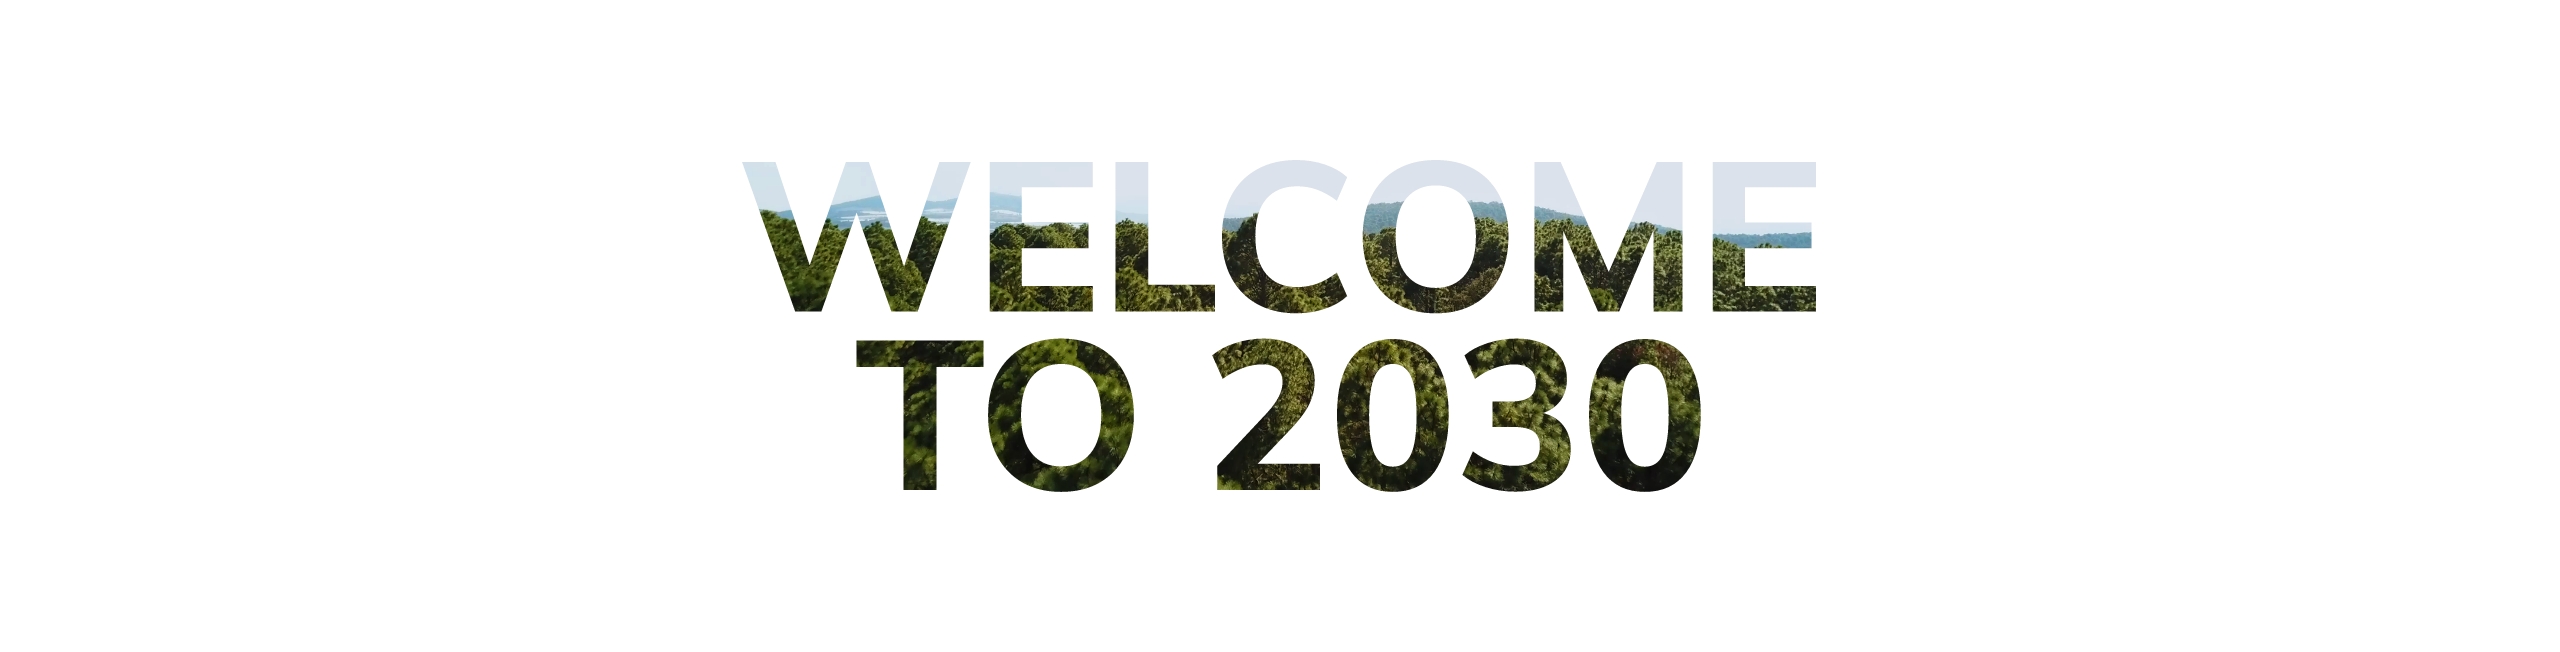 welcome 2030